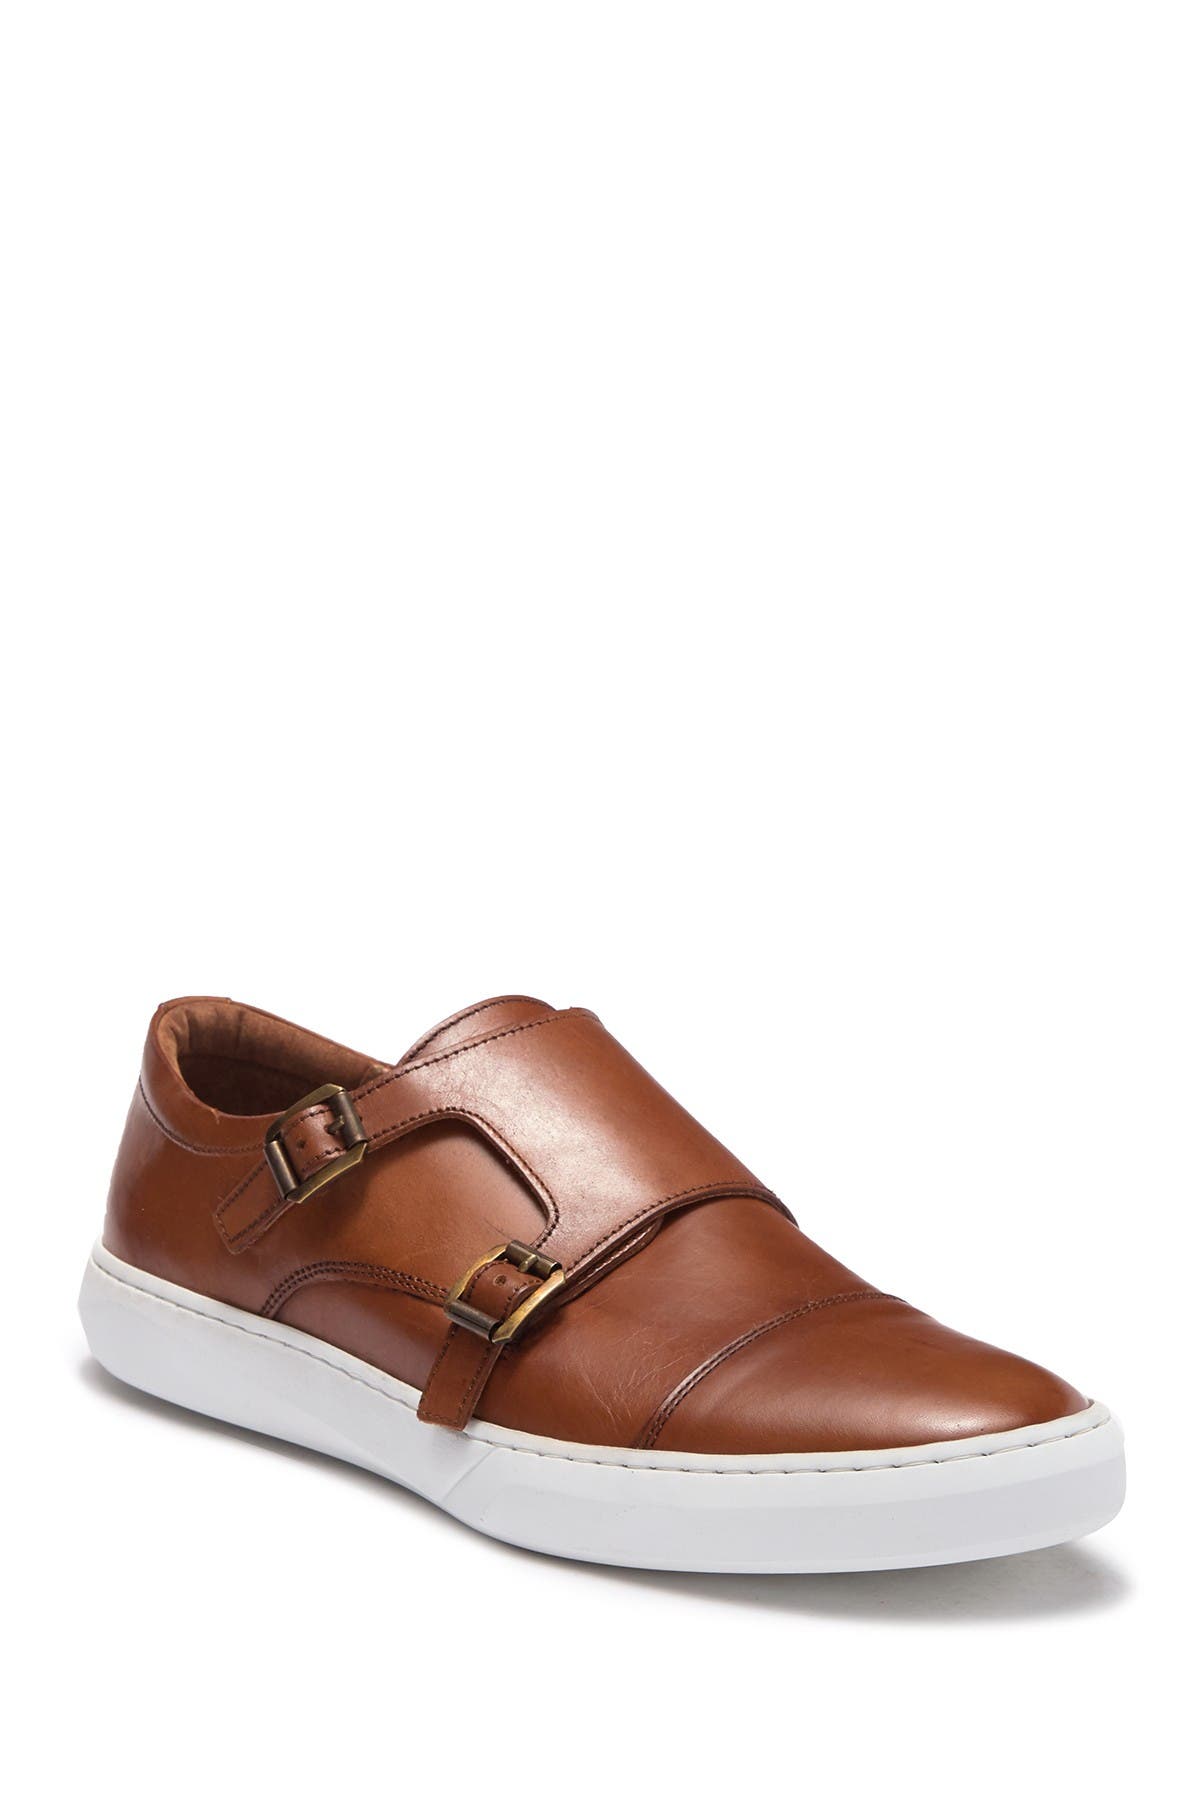 Kenneth Cole New York | Whyle Monk 